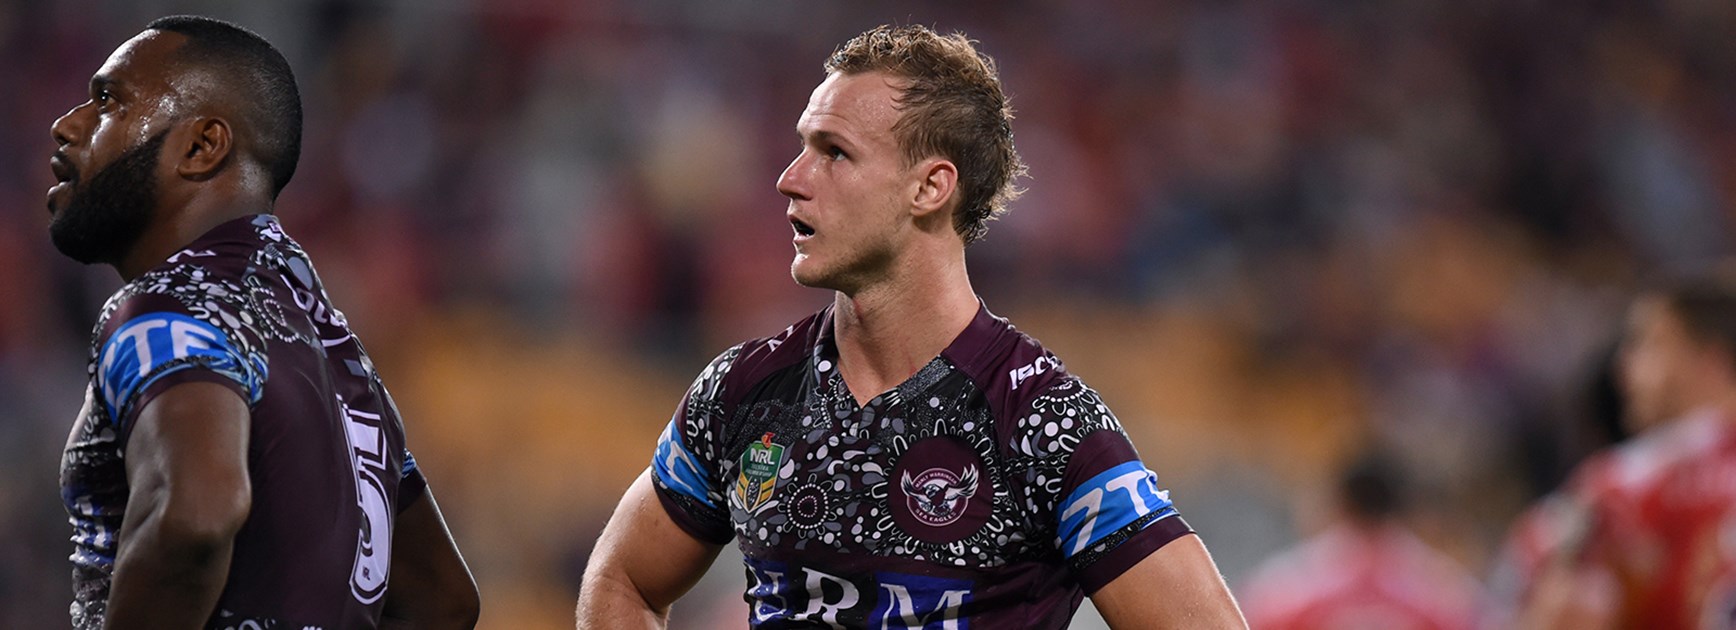 Manly search for positives in form slump